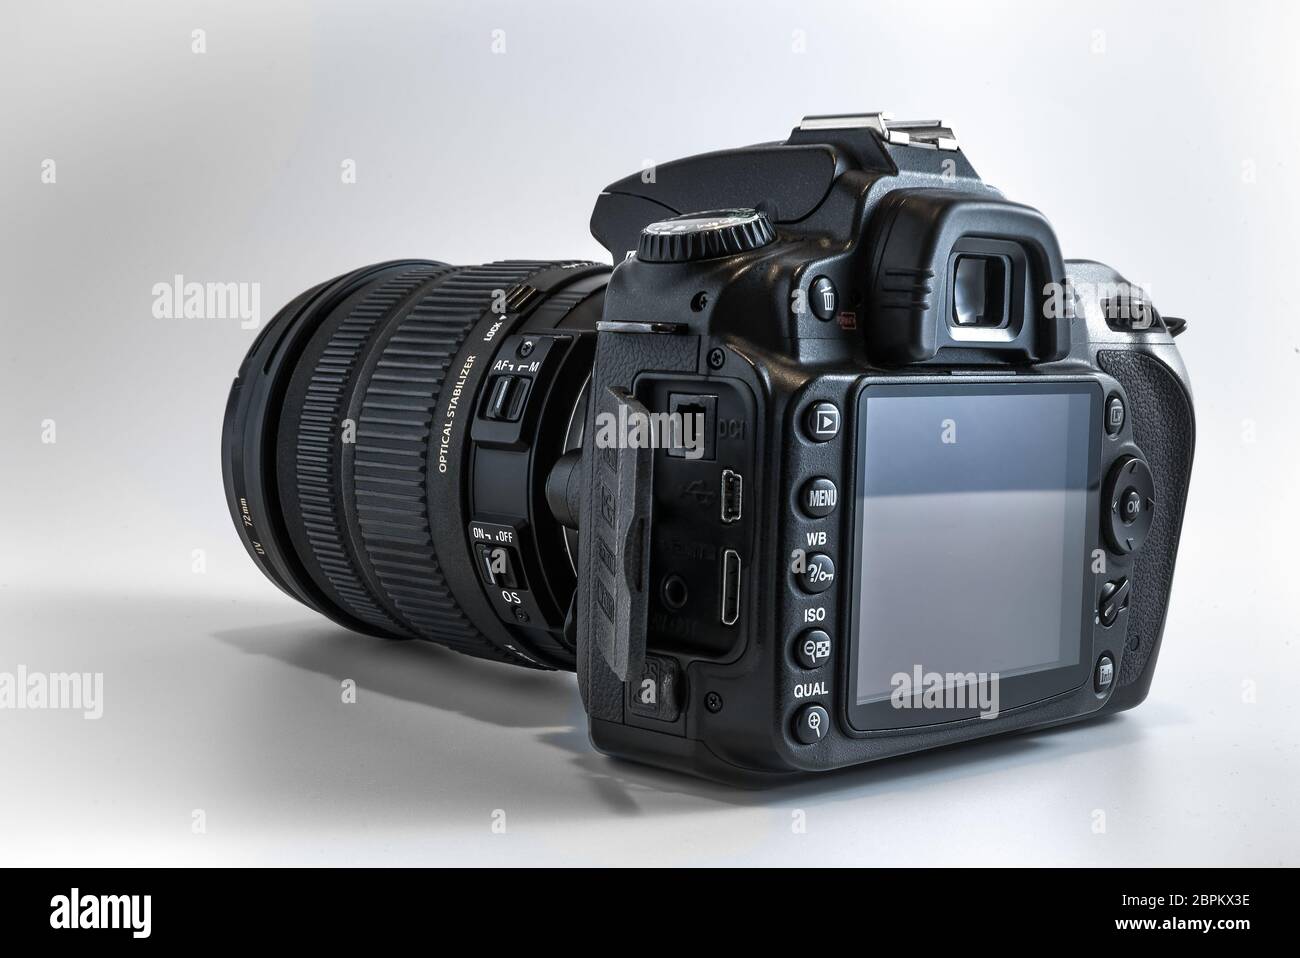 Close-up of a professional digital dslr camera for photography students, freelance photo journalism, photographic bloggers, or creative travel photogr Stock Photo